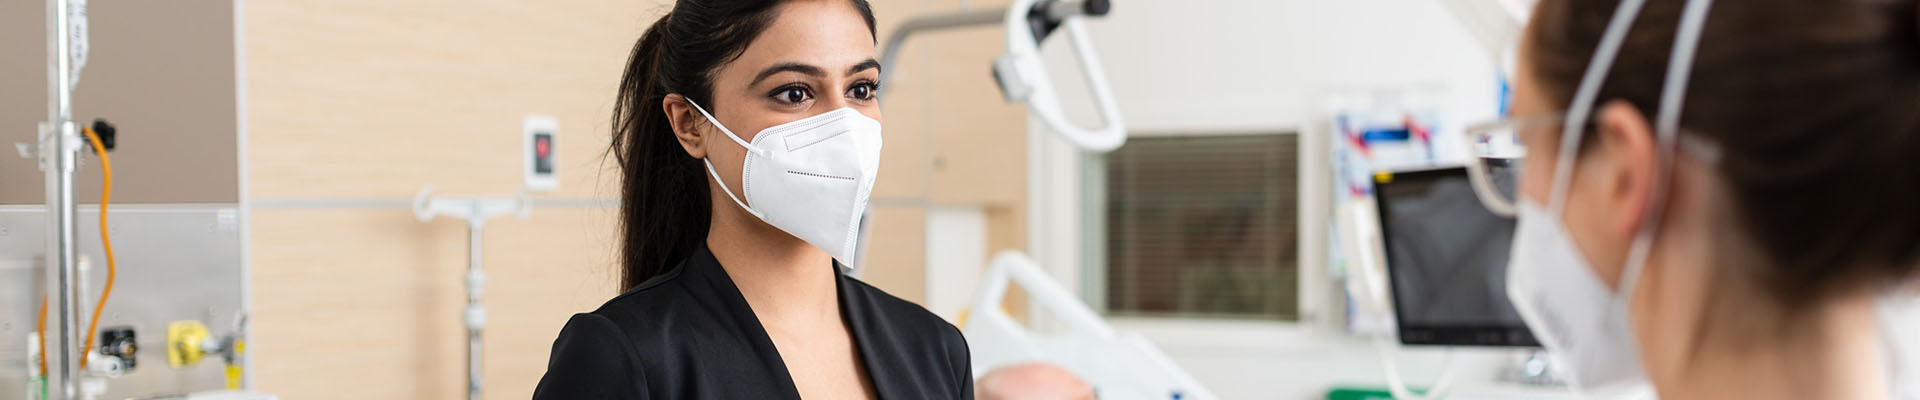 Woman in a hospital setting wearing a mask